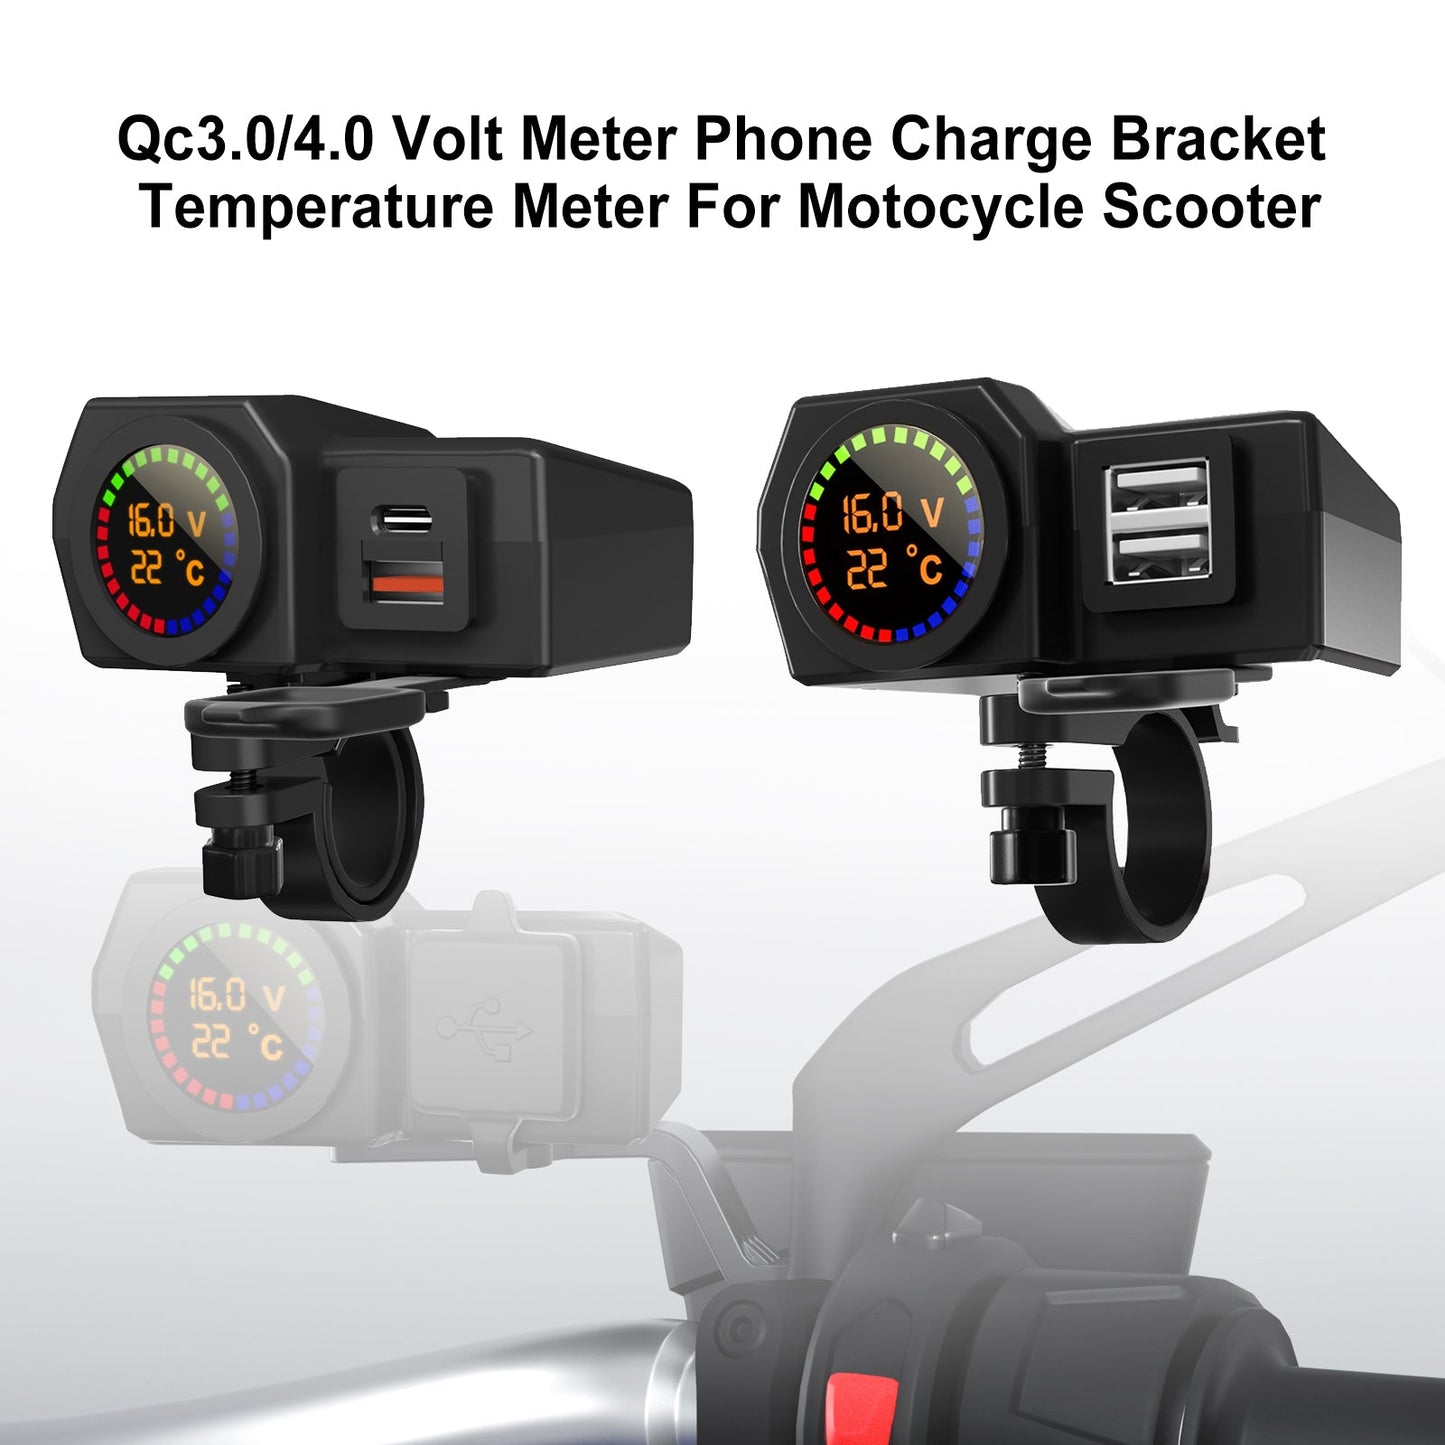 Qc3.0 Volt Meter Phone Charge Bracket Temperature Meter Black A For Moto Scooter